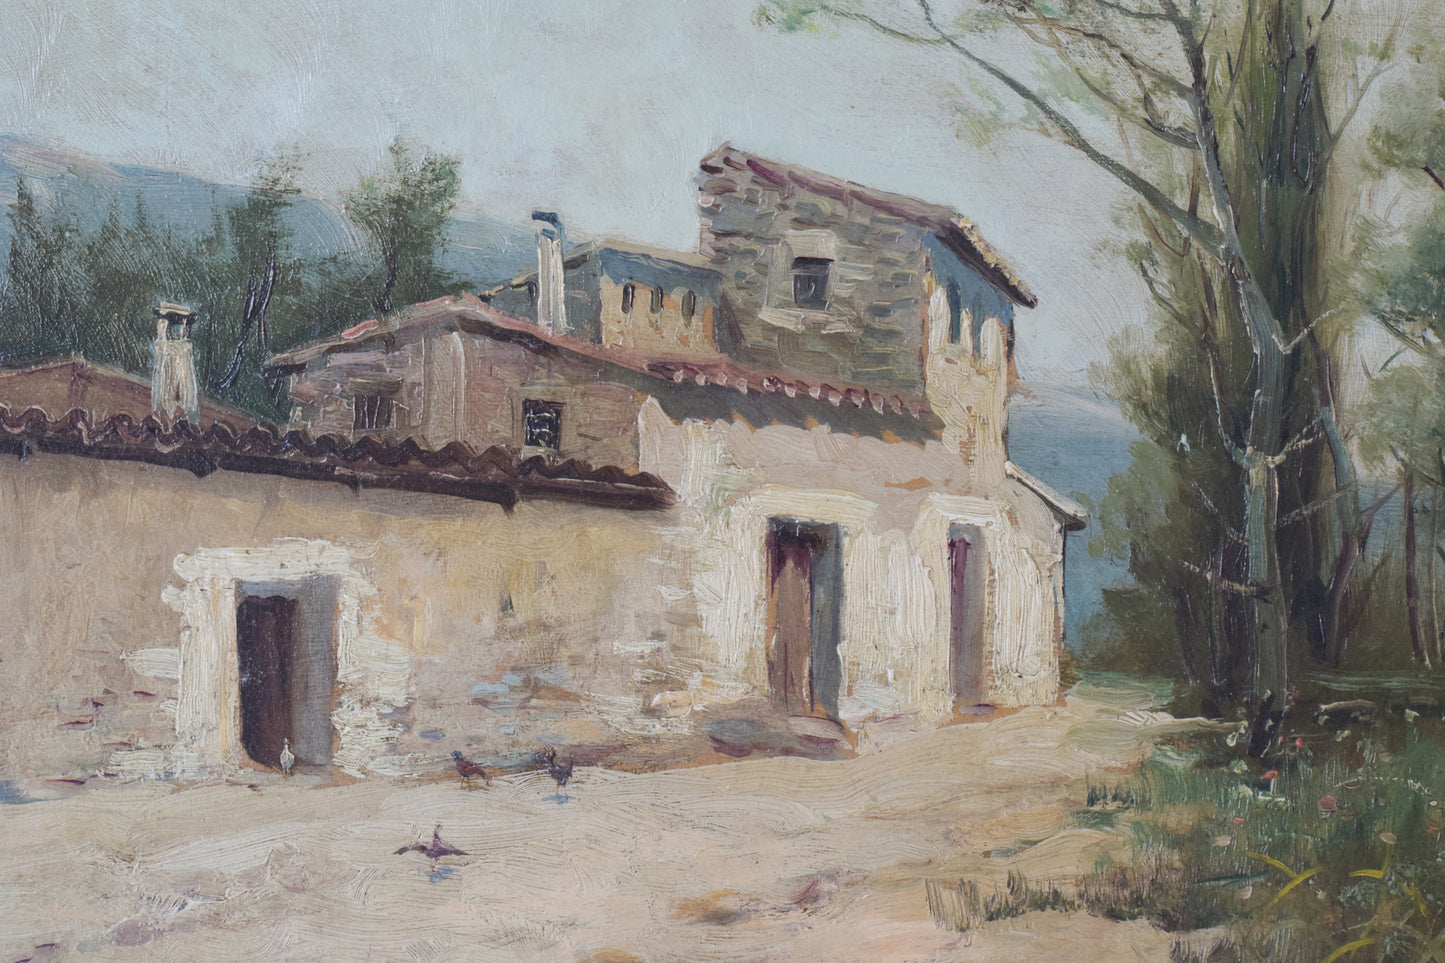 Spanish Landscape with Farmhouse and Wildflower Meadow_Detail